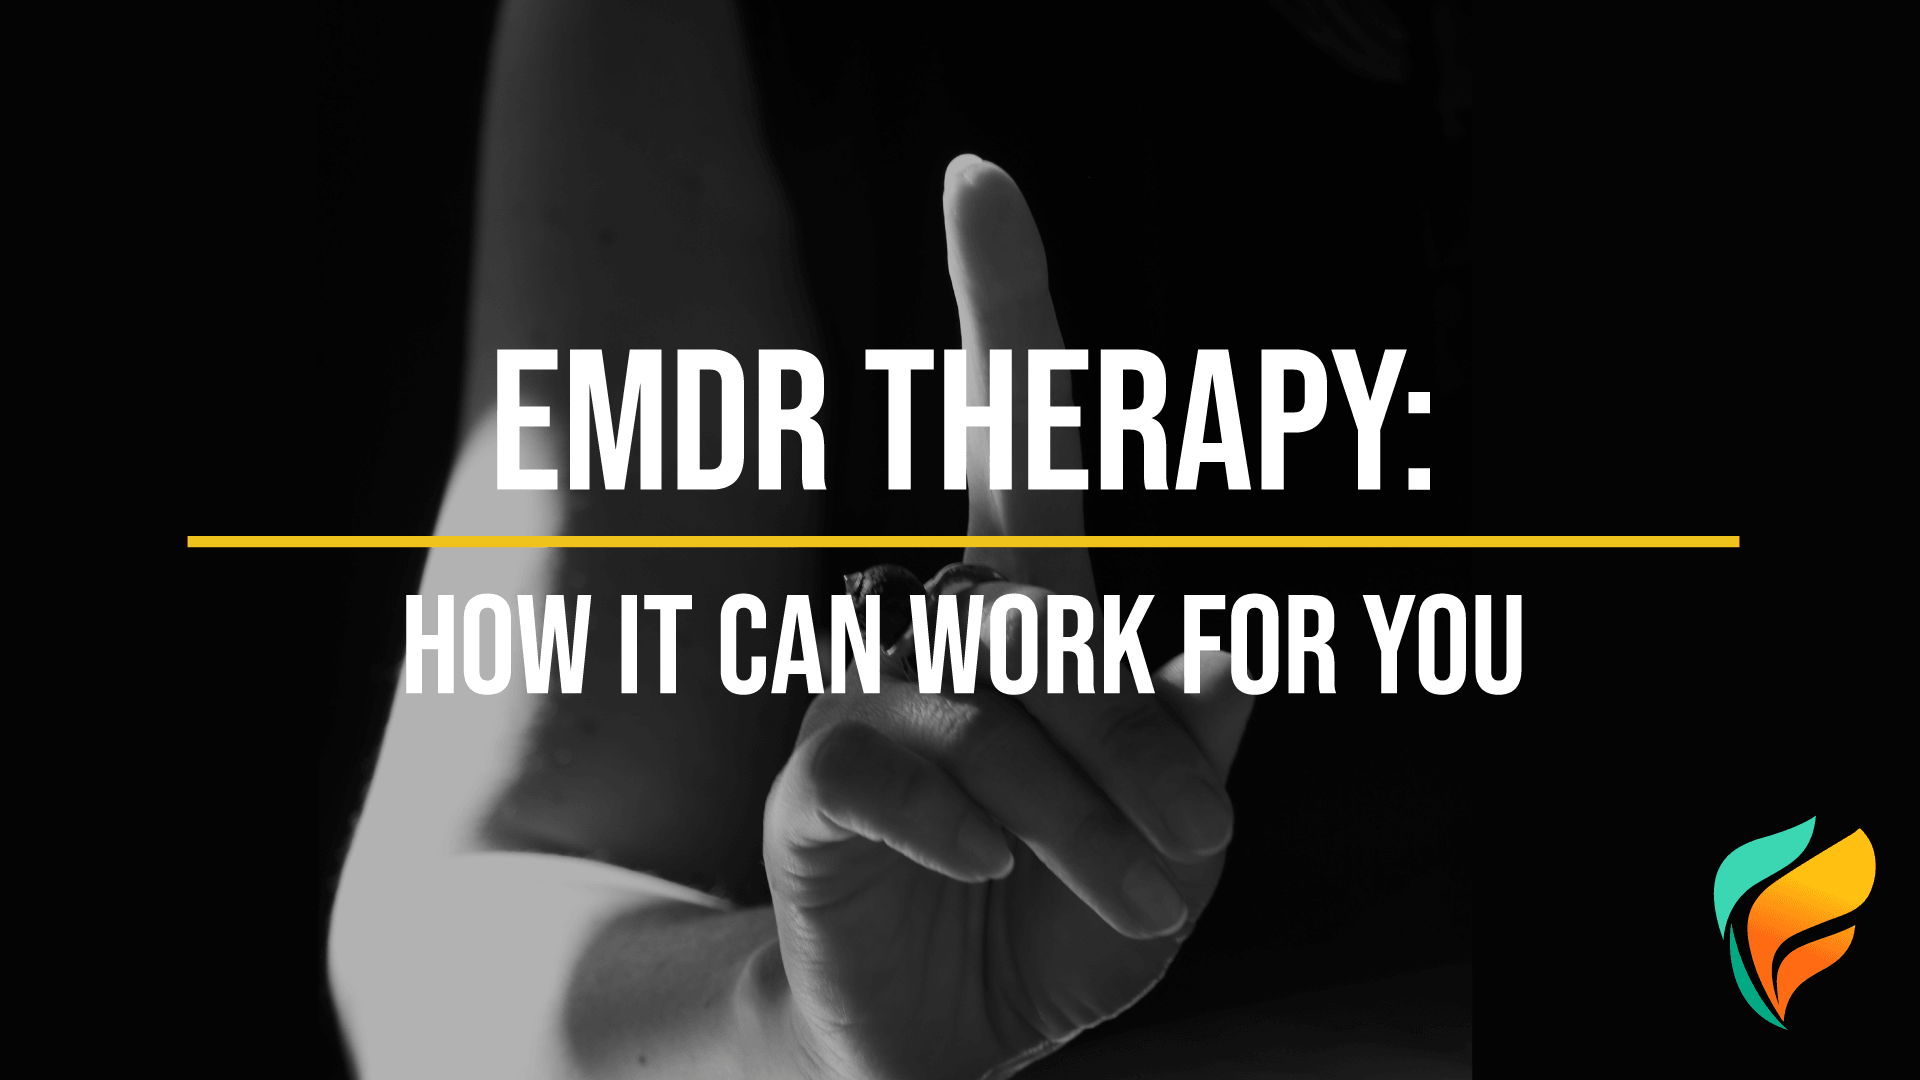 EMDR Therapy: How It Can Treat Addiction, Mental Health, & More